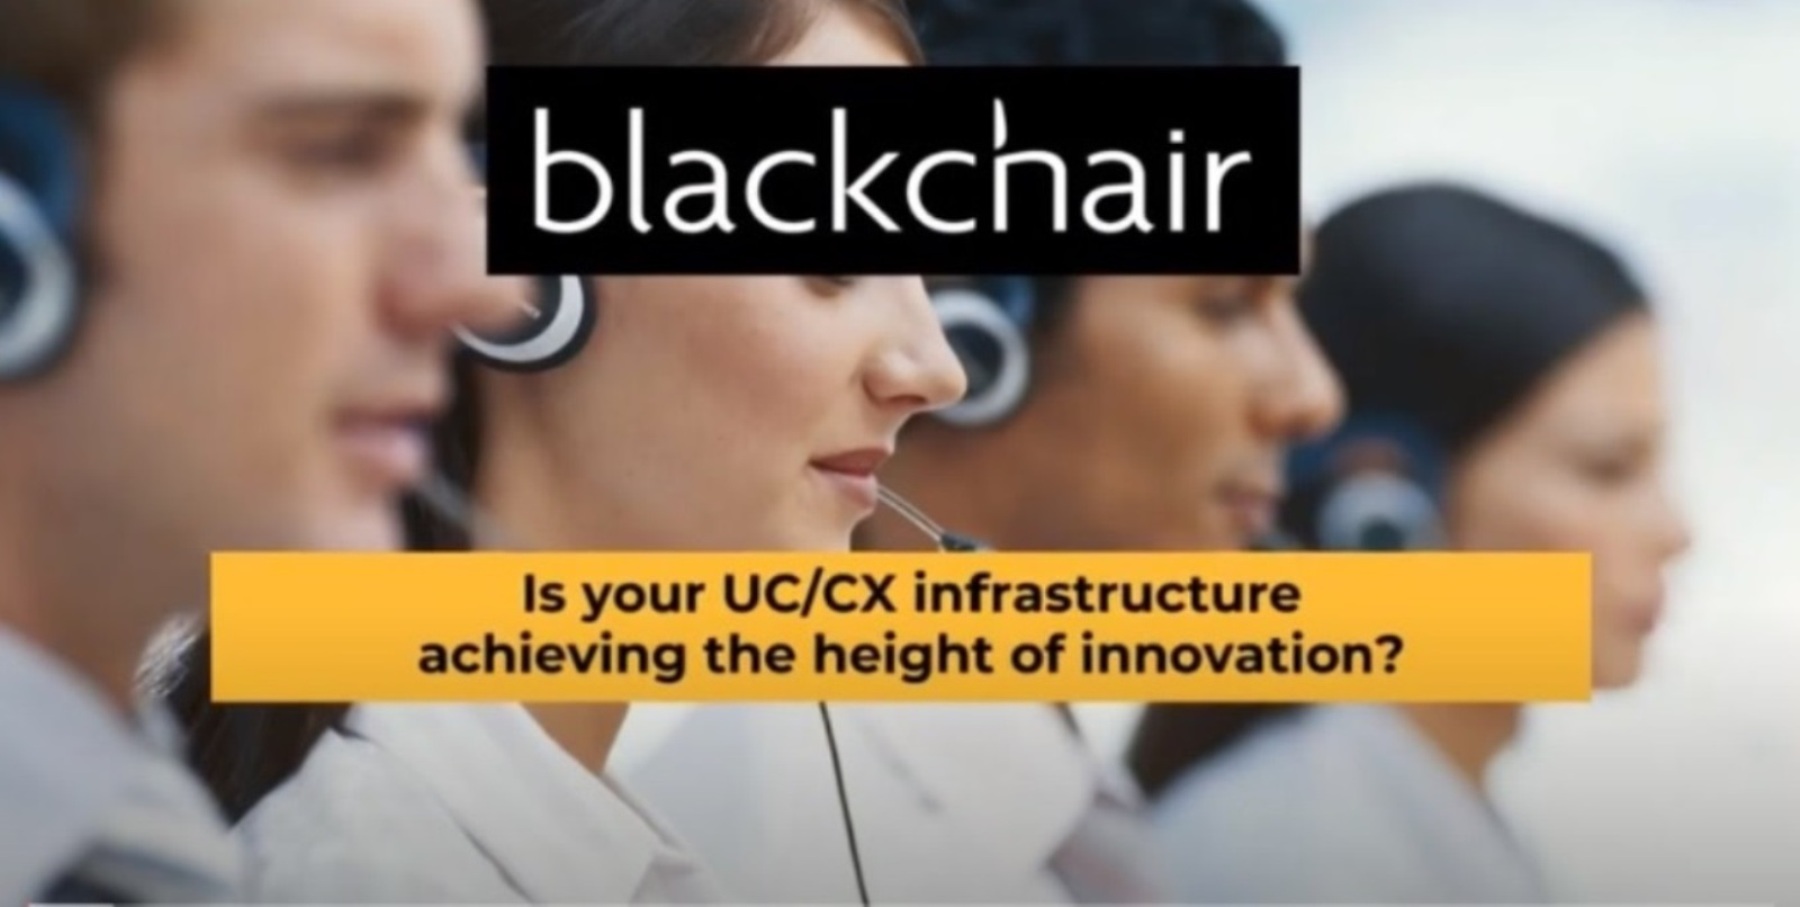 Optimize CX operations using Blackchair